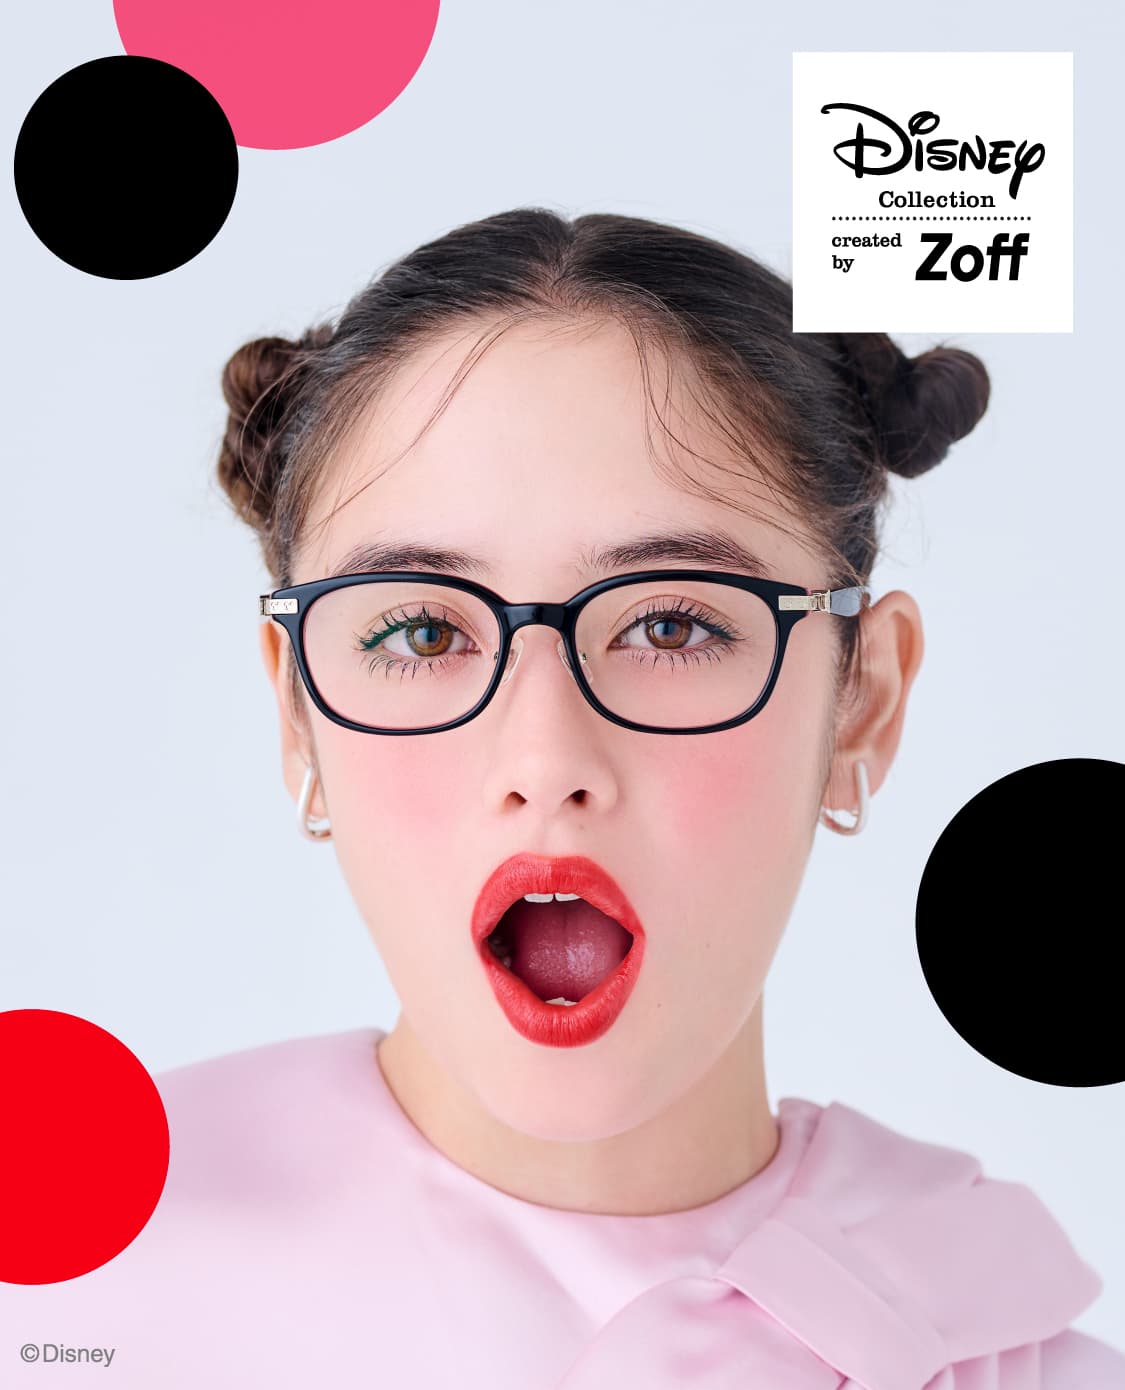 DISNEY Collection created by Zoff(ディズニー・コレクション